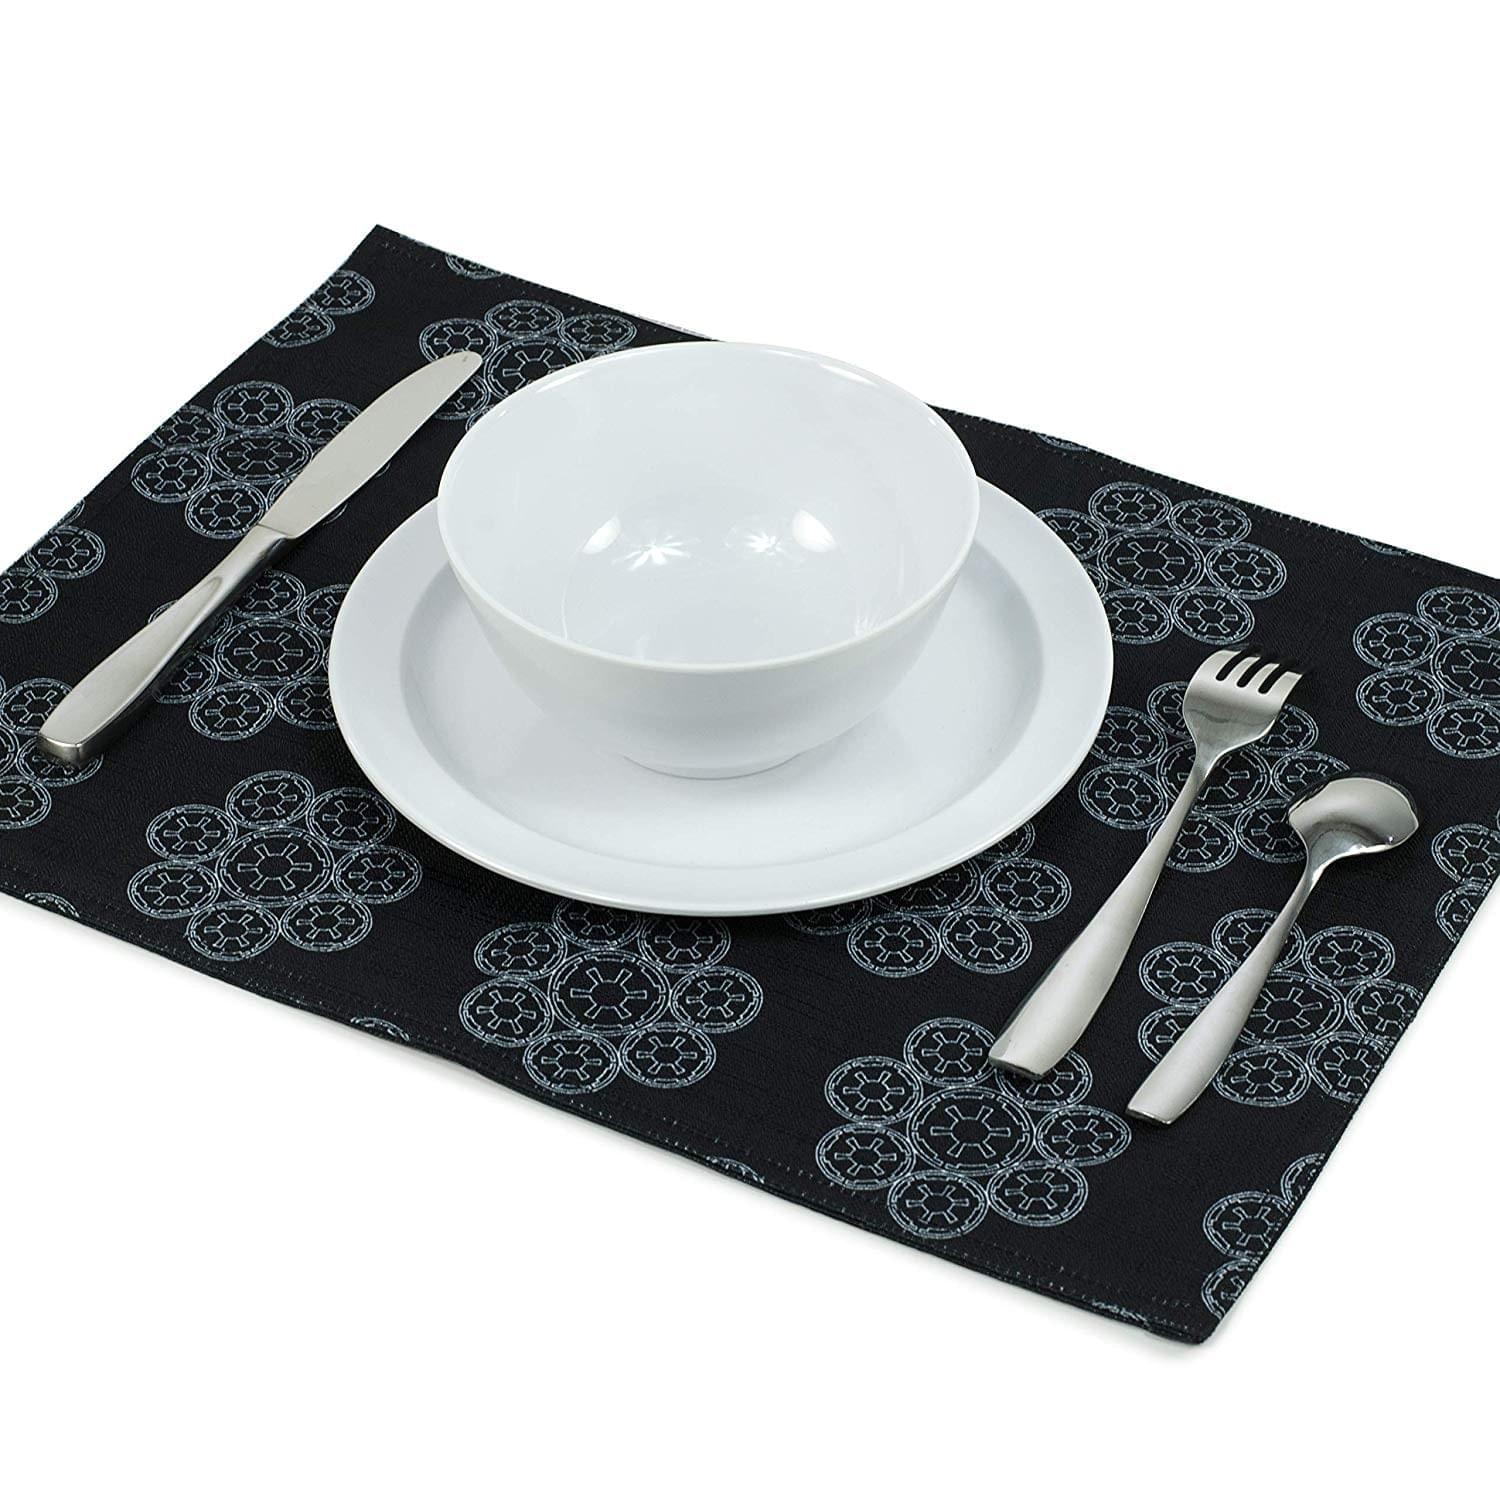 Star Wars White Imperial Logo Black Outdoor Dining Placemats - Set Of 4